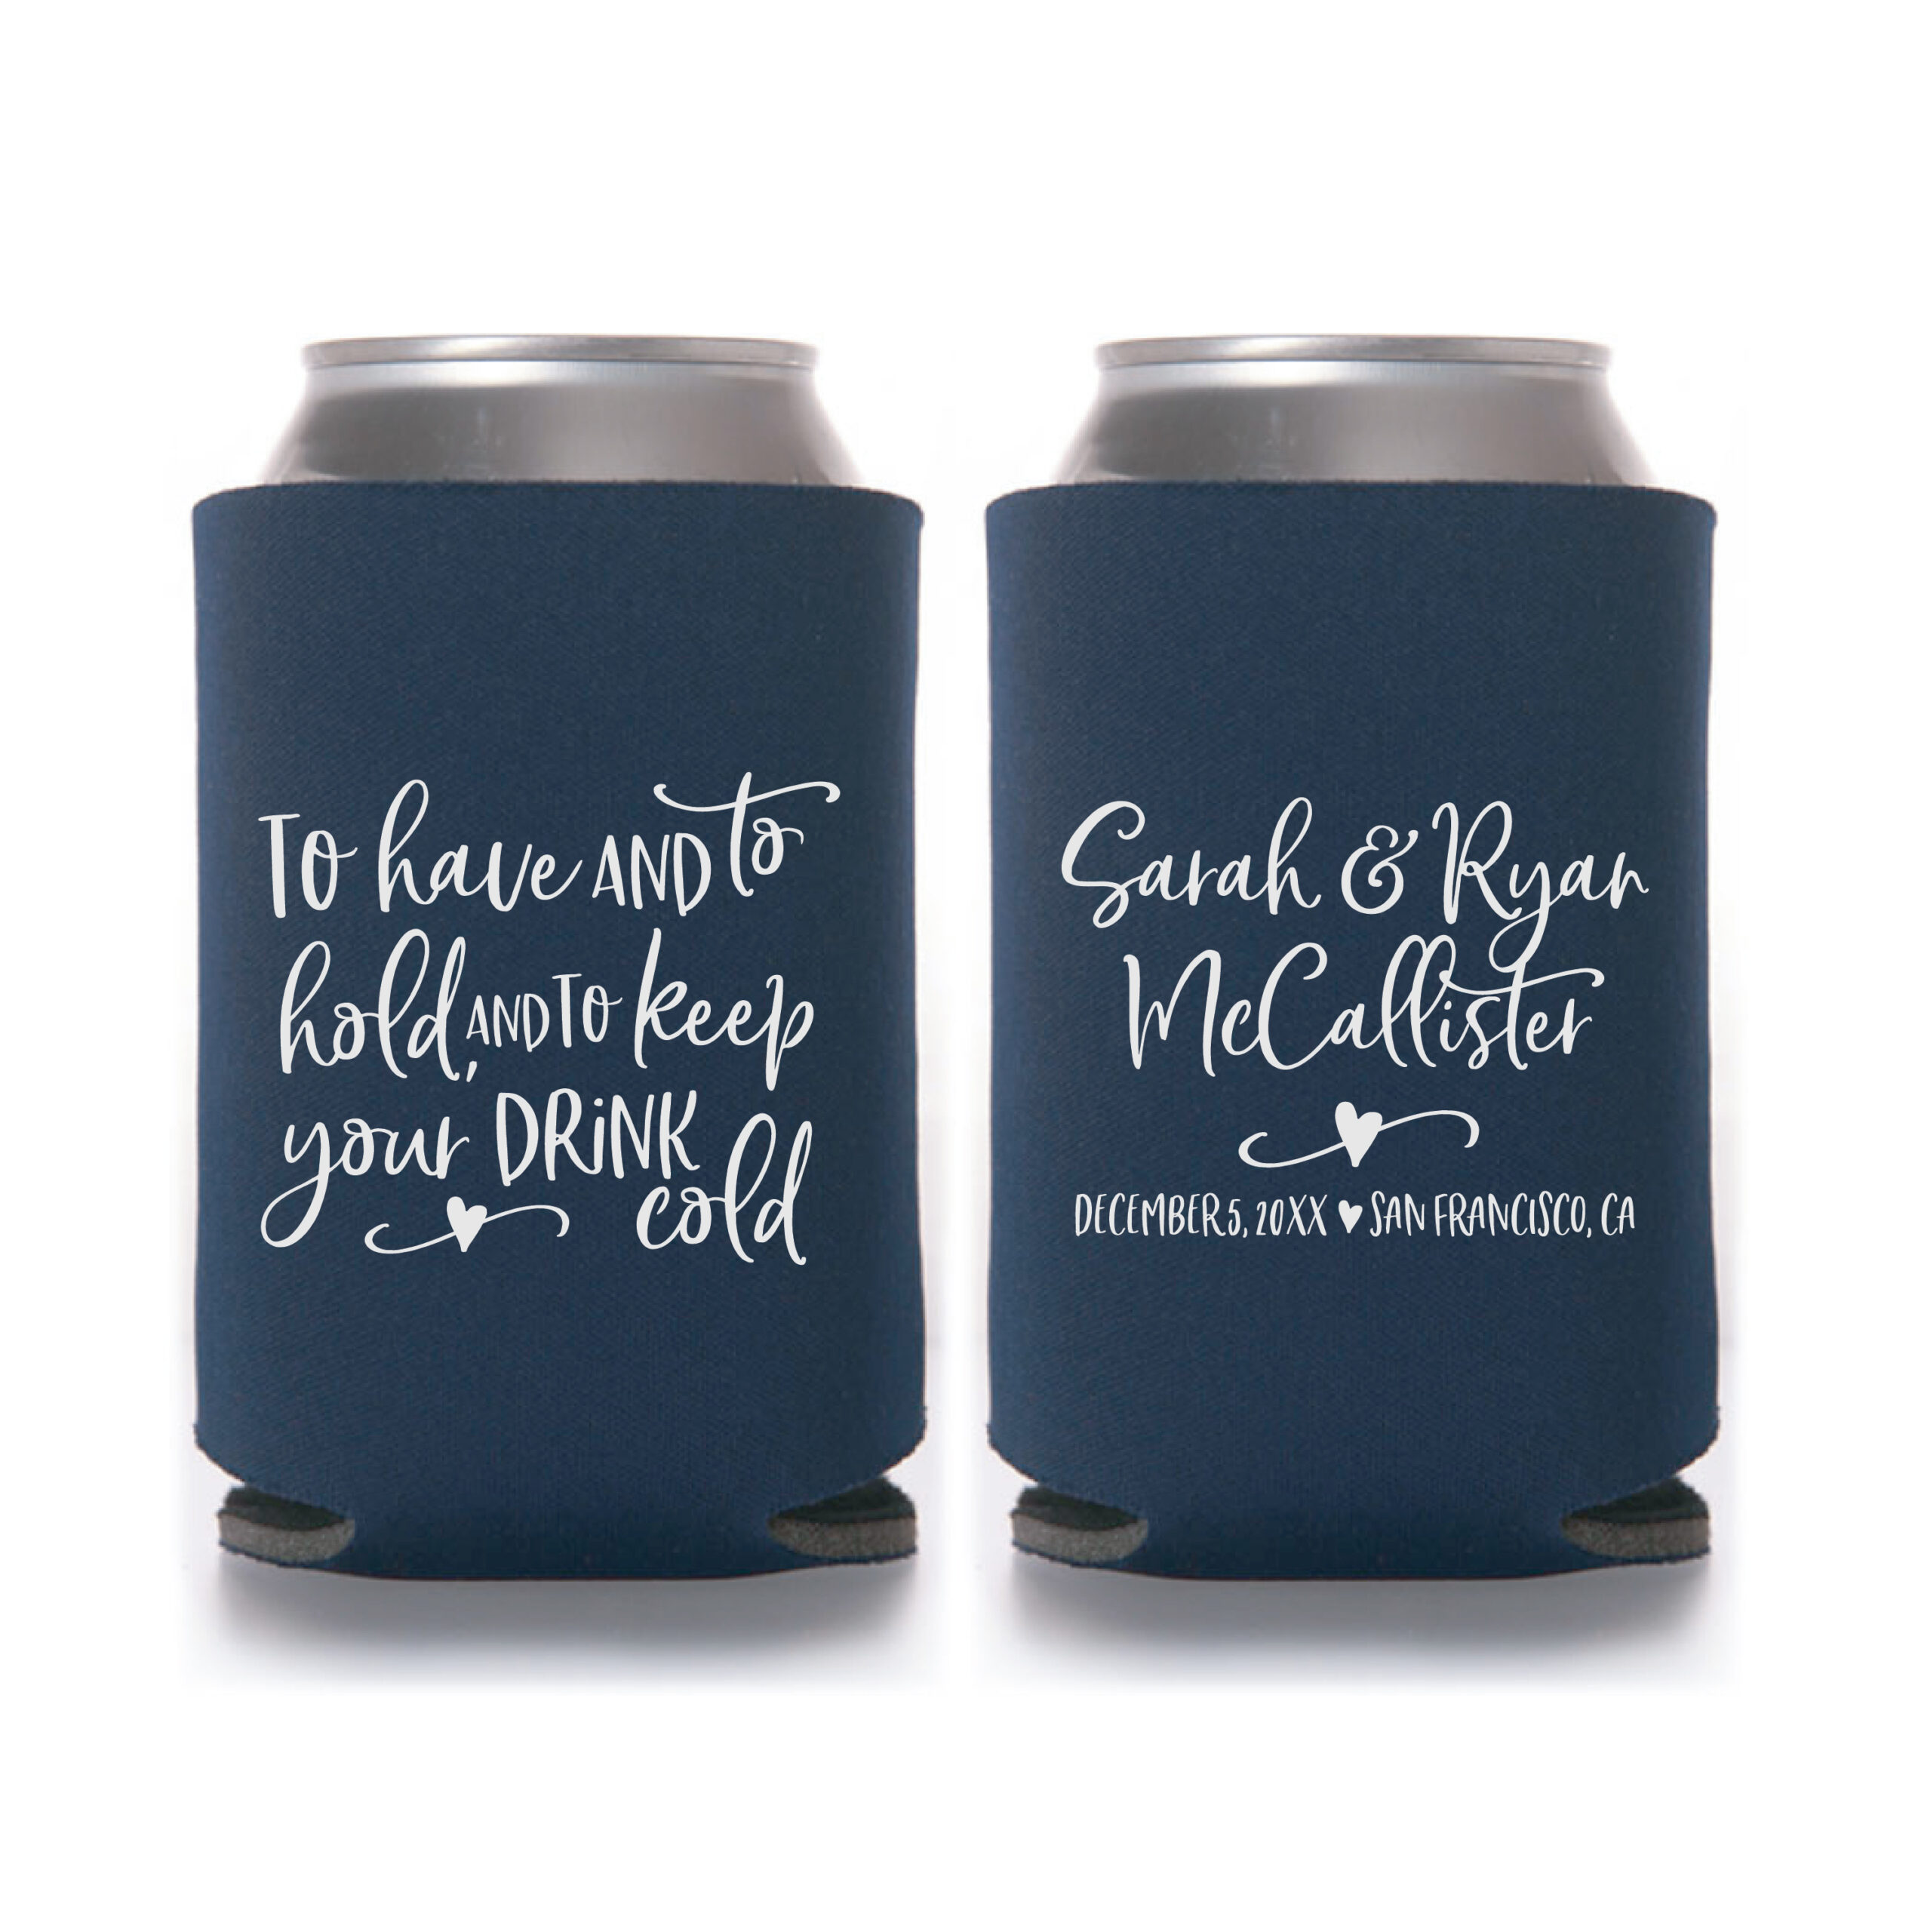 To have and to hold and to keep your drink cold, Personalzed Wedding Koozie in Handwritten Fonts, Typography - Style #T17